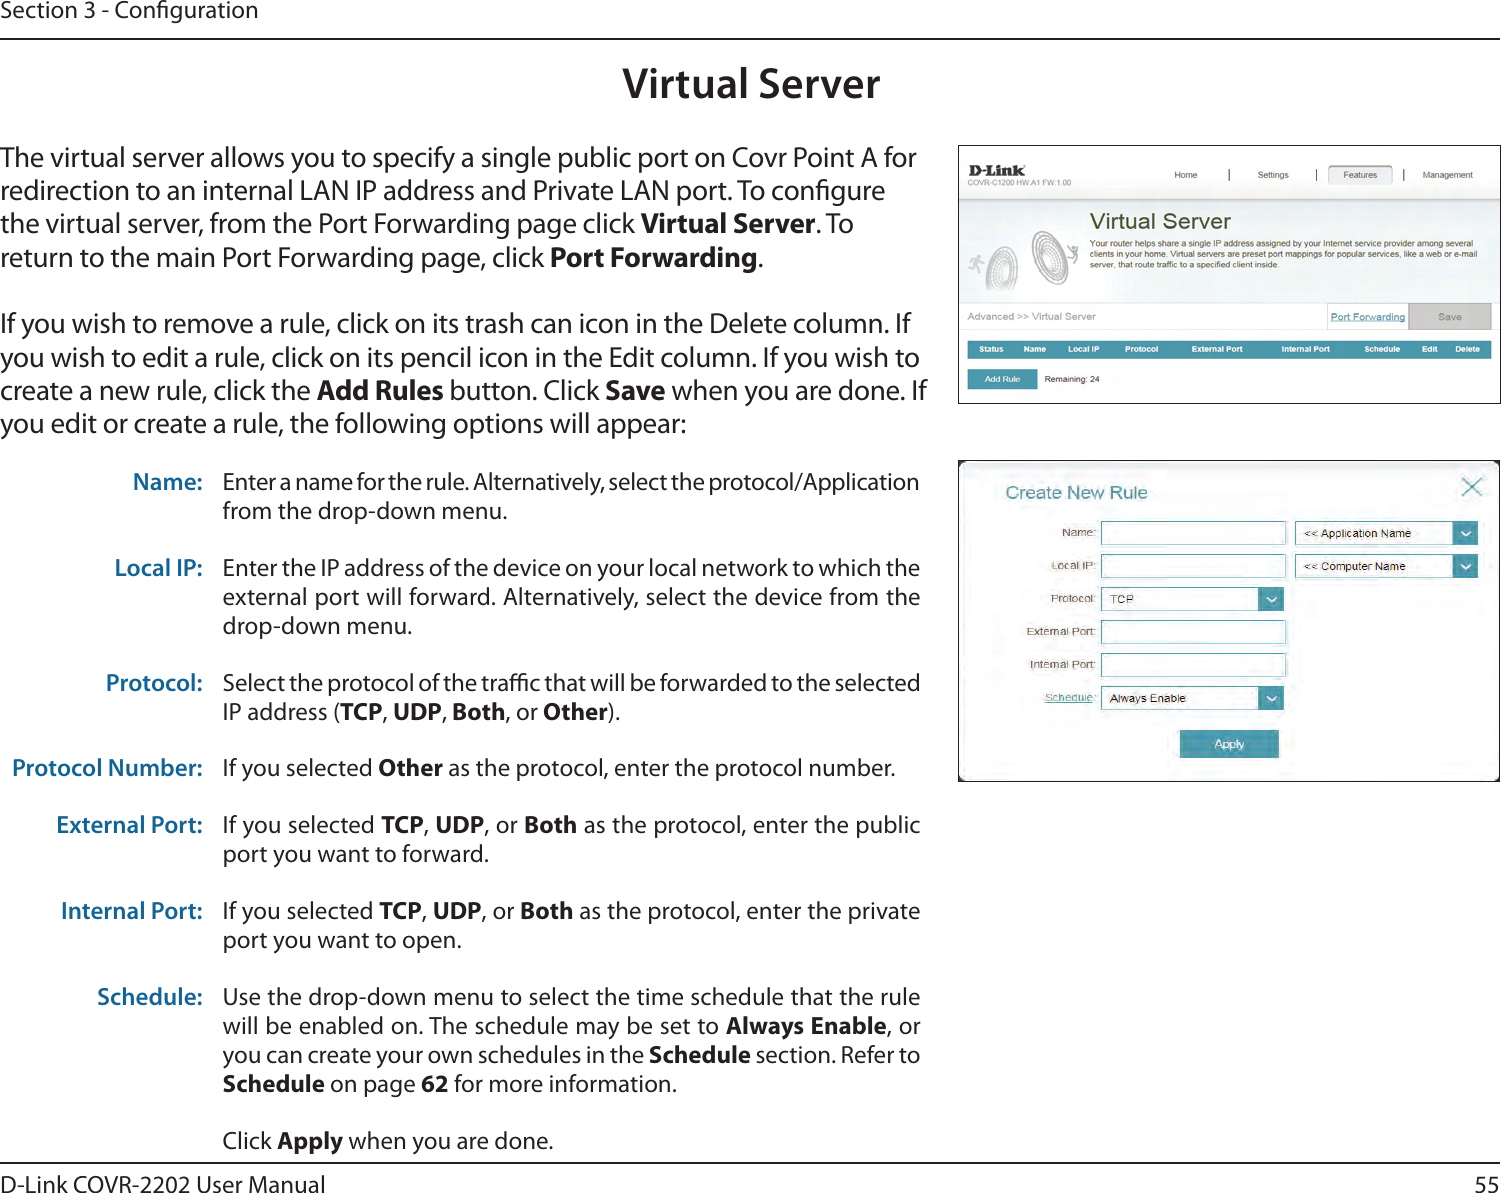 55D-Link COVR-2202 User ManualSection 3 - CongurationVirtual ServerThe virtual server allows you to specify a single public port on Covr Point A for redirection to an internal LAN IP address and Private LAN port. To congure the virtual server, from the Port Forwarding page click Virtual Server. To return to the main Port Forwarding page, click Port Forwarding.If you wish to remove a rule, click on its trash can icon in the Delete column. If you wish to edit a rule, click on its pencil icon in the Edit column. If you wish to create a new rule, click the Add Rules button. Click Save when you are done. If you edit or create a rule, the following options will appear:Name: Enter a name for the rule. Alternatively, select the protocol/Application from the drop-down menu.Local IP: Enter the IP address of the device on your local network to which the external port will forward. Alternatively, select the device from the drop-down menu.Protocol: Select the protocol of the trac that will be forwarded to the selected IP address (TCP, UDP, Both, or Other).Protocol Number: If you selected Other as the protocol, enter the protocol number.External Port: If you selected TCP, UDP, or Both as the protocol, enter the public port you want to forward.Internal Port: If you selected TCP, UDP, or Both as the protocol, enter the private port you want to open.Schedule: Use the drop-down menu to select the time schedule that the rule will be enabled on. The schedule may be set to Always Enable, or you can create your own schedules in the Schedule section. Refer to Schedule on page 62 for more information.Click Apply when you are done.